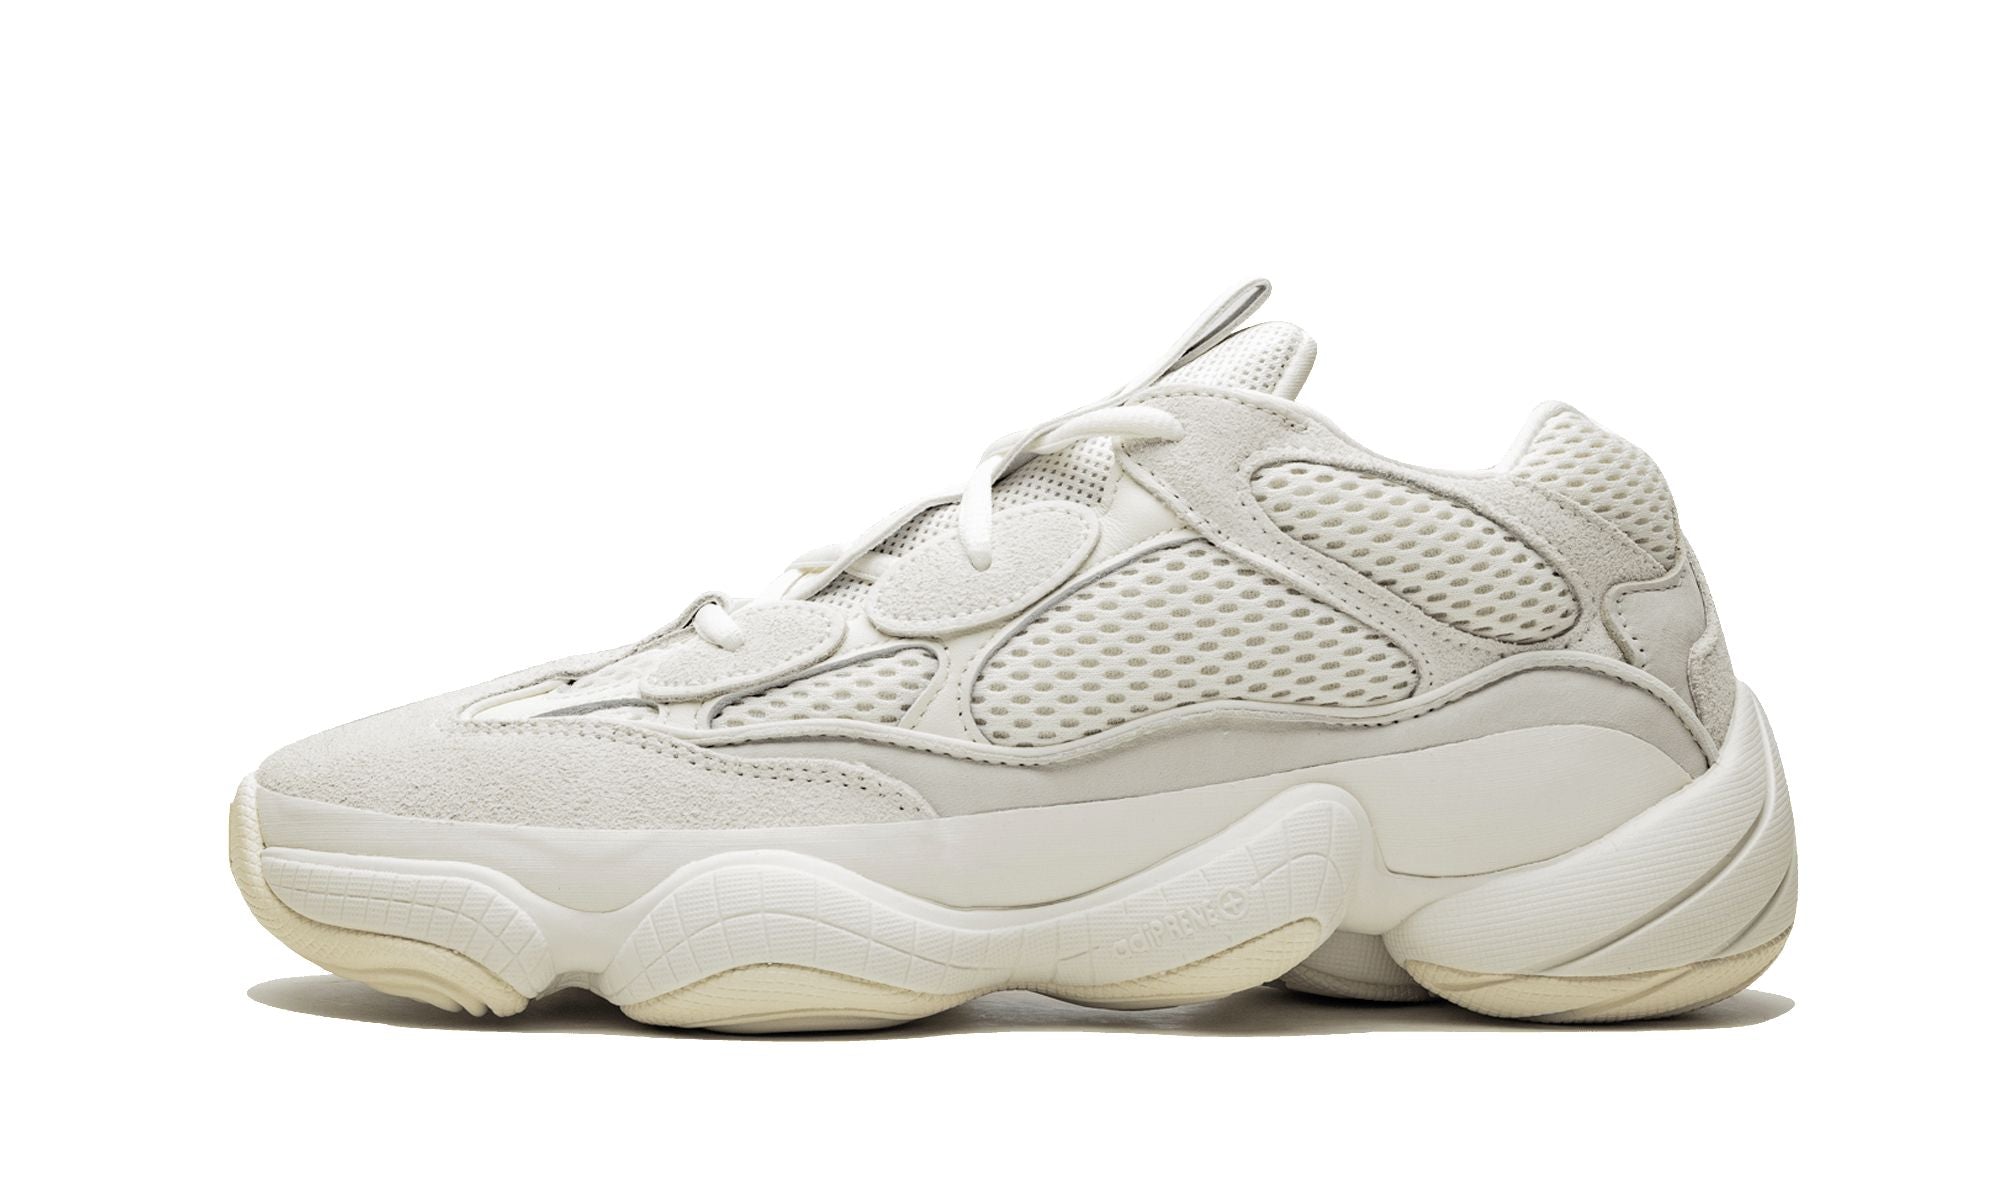 Yeezy 500 Bone White – Special Delivery ldn